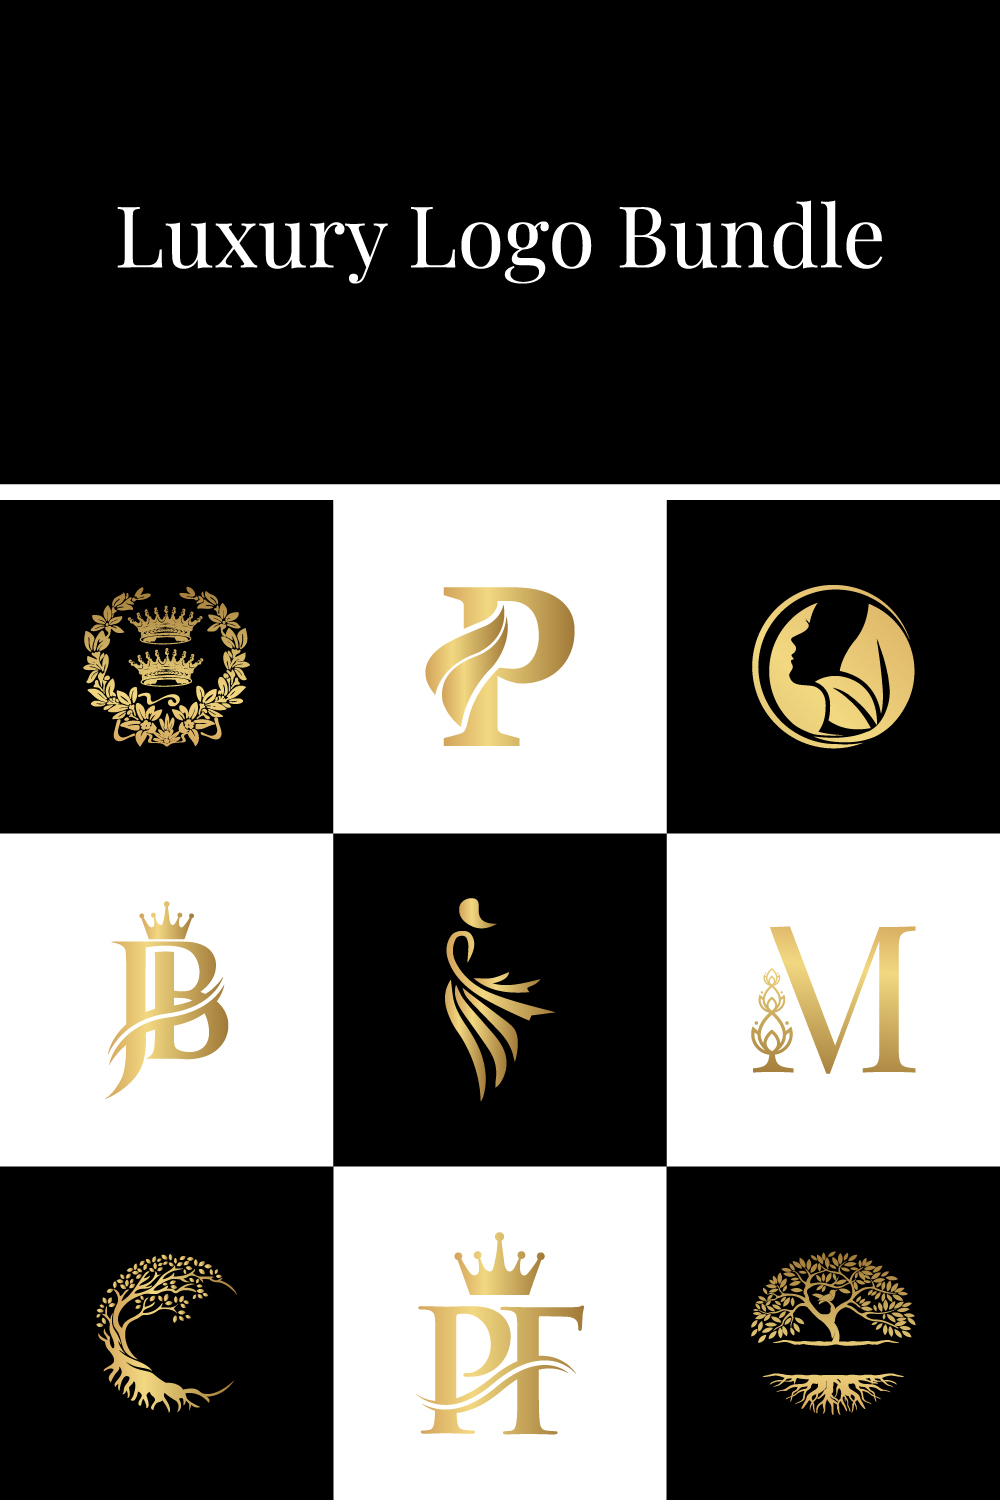 A selection of images with beautiful luxury logos in gold color.